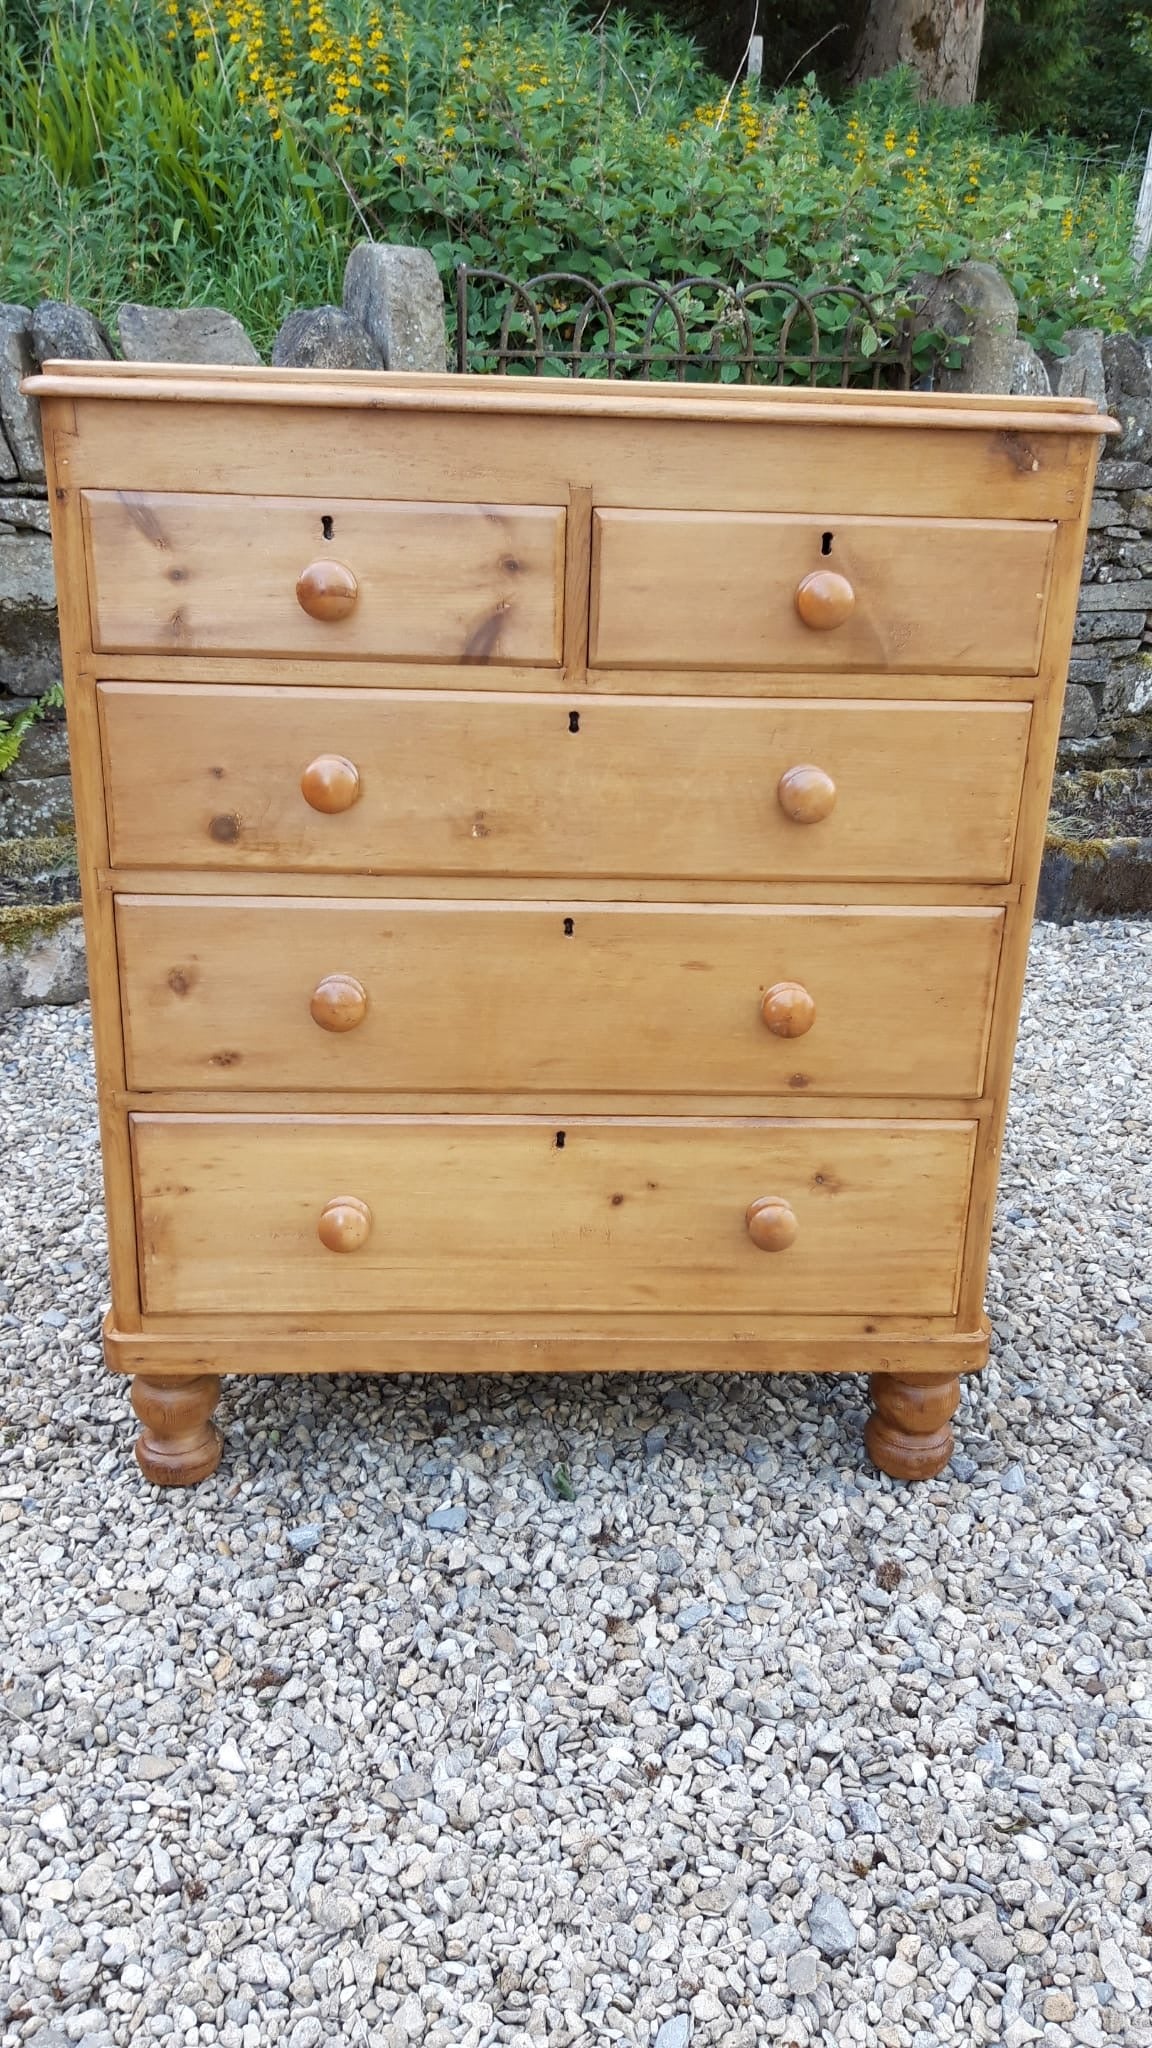 Antique Pine English Chest of Drawers with Fruitwood Knobs c. 1880